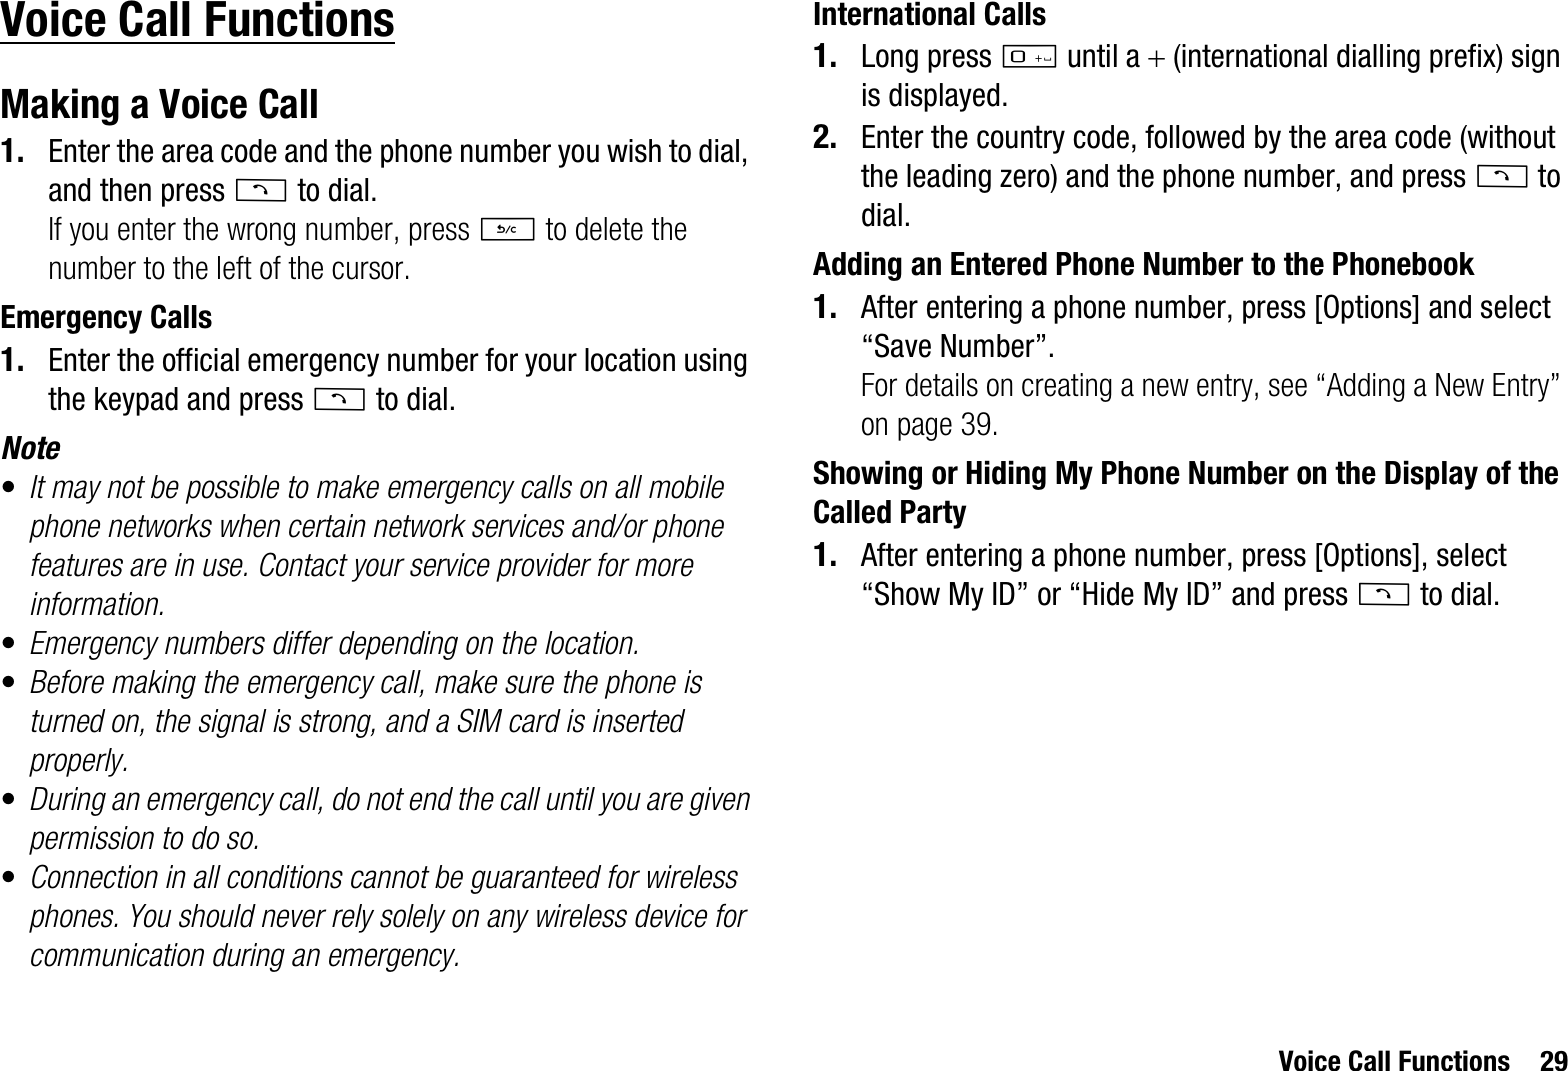 Voice Call Functions 29Voice Call FunctionsMaking a Voice Call1. Enter the area code and the phone number you wish to dial, and then press D to dial.If you enter the wrong number, press U to delete the number to the left of the cursor.Emergency Calls1. Enter the official emergency number for your location using the keypad and press D to dial.Note•It may not be possible to make emergency calls on all mobile phone networks when certain network services and/or phone features are in use. Contact your service provider for more information.•Emergency numbers differ depending on the location.•Before making the emergency call, make sure the phone is turned on, the signal is strong, and a SIM card is inserted properly.•During an emergency call, do not end the call until you are given permission to do so.•Connection in all conditions cannot be guaranteed for wireless phones. You should never rely solely on any wireless device for communication during an emergency.International Calls1. Long press Q until a  (international dialling prefix) sign is displayed.2. Enter the country code, followed by the area code (without the leading zero) and the phone number, and press D to dial.Adding an Entered Phone Number to the Phonebook1. After entering a phone number, press [Options] and select “Save Number”.For details on creating a new entry, see “Adding a New Entry” on page 39.Showing or Hiding My Phone Number on the Display of the Called Party1. After entering a phone number, press [Options], select “Show My ID” or “Hide My ID” and press D to dial.